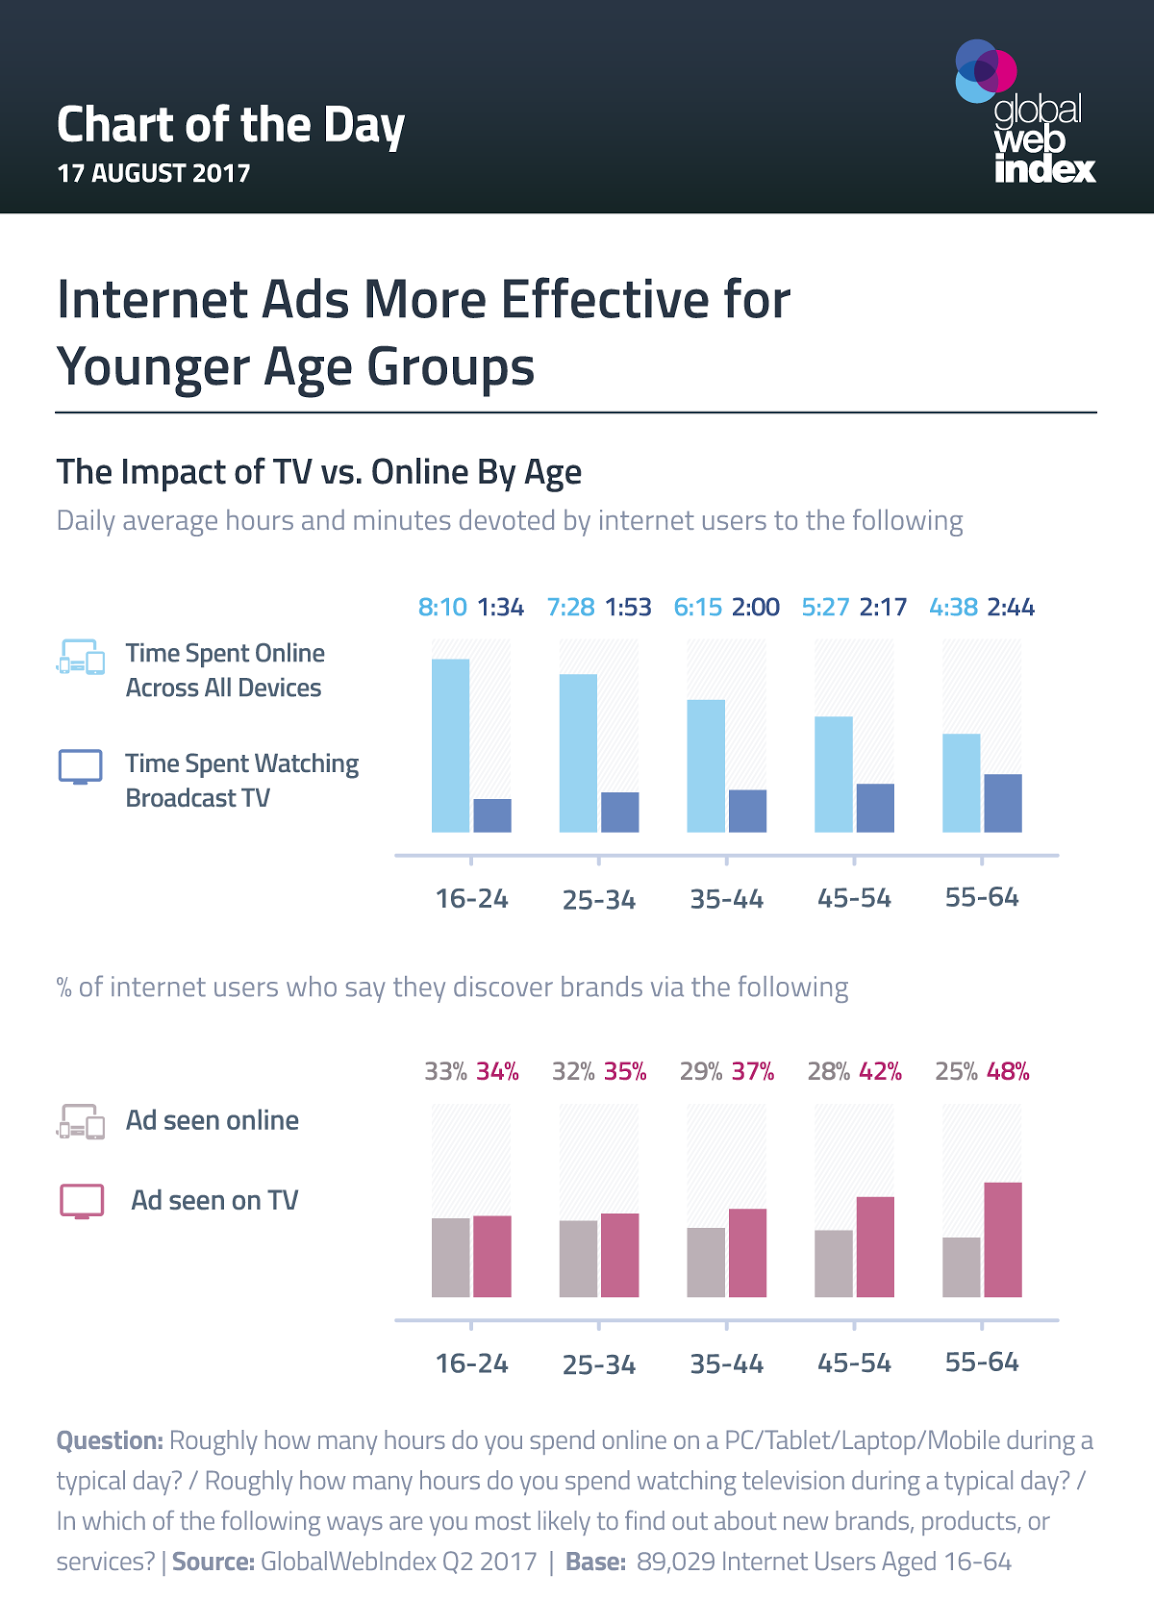 Internet Ads More Effective for Younger Age Groups